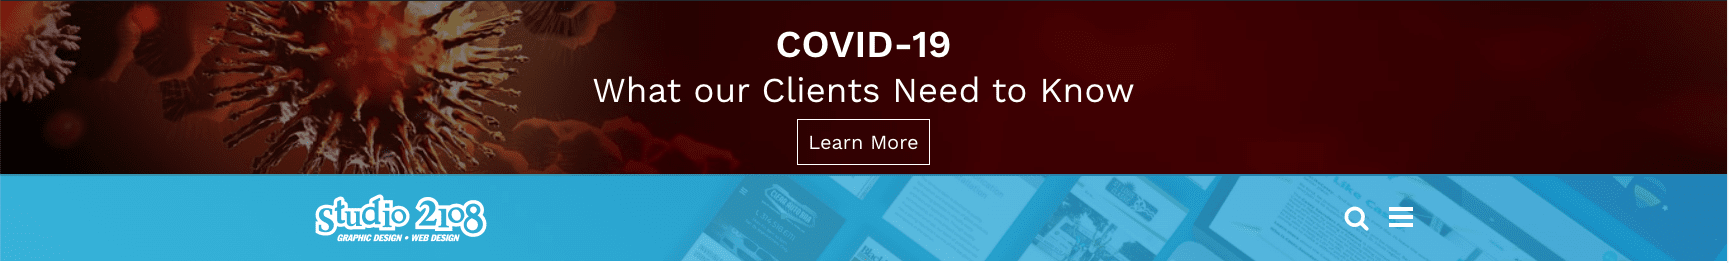 covid 19 featured image